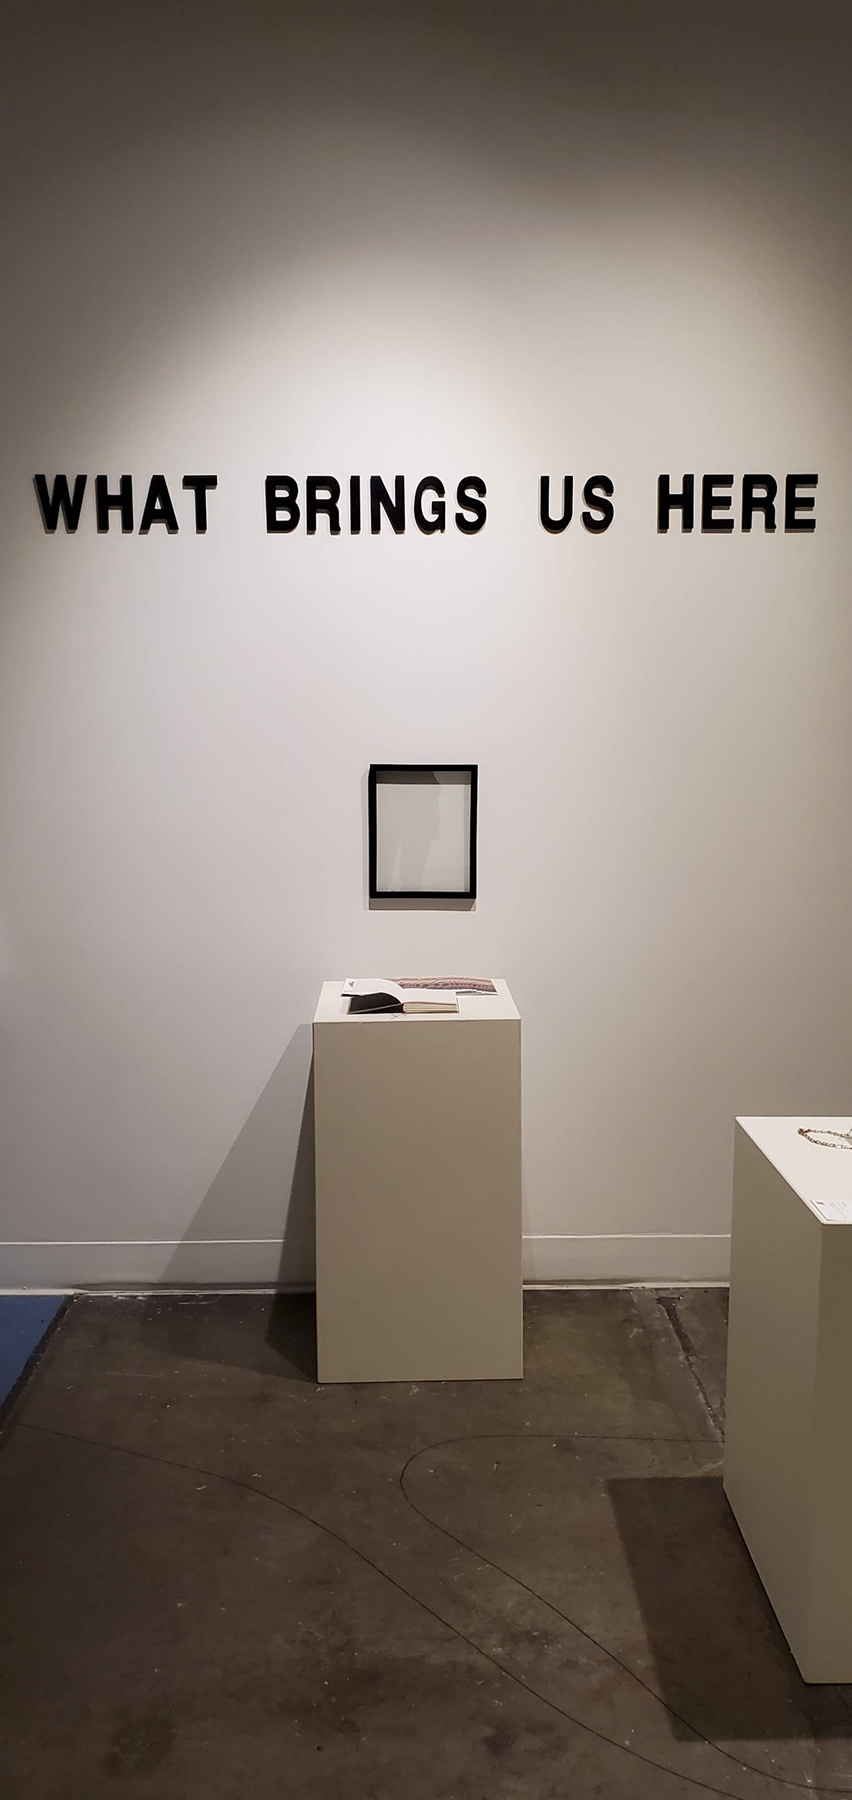 Gallery installation from Christen Booth's exhibition What Brings Us Here, image courtesy of the artist